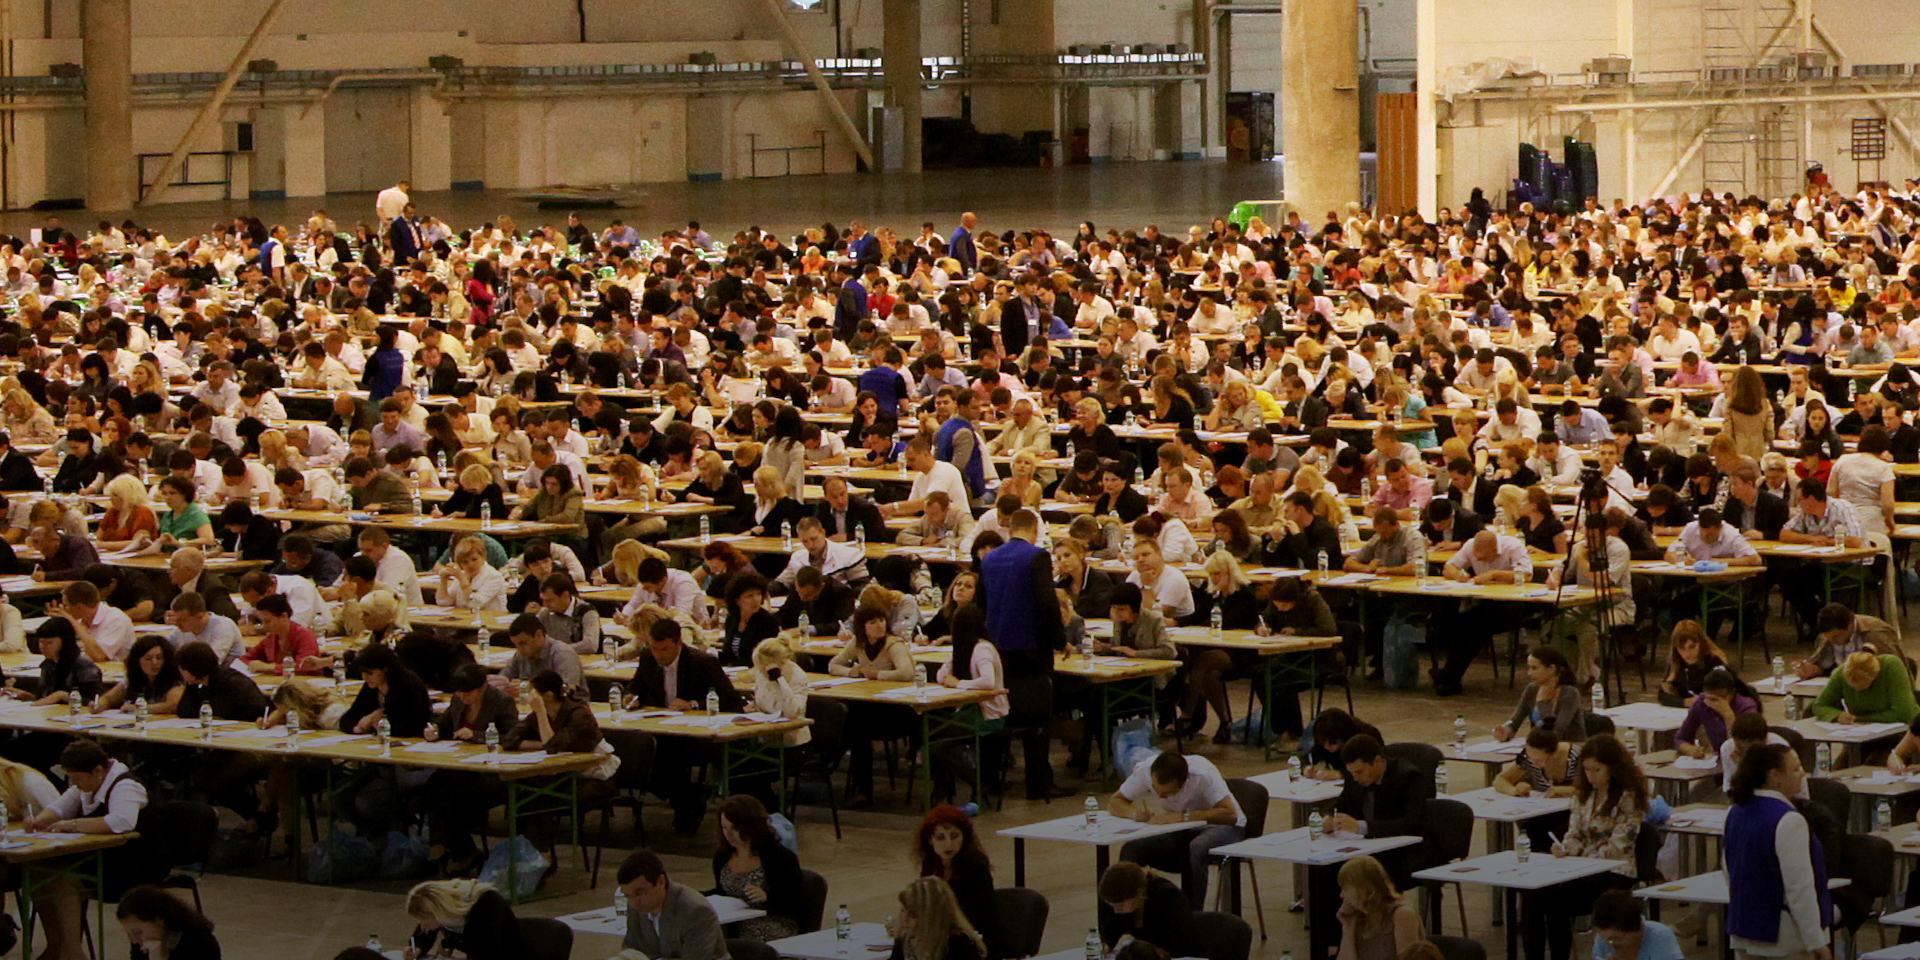 The interior of a large building filled with hundreds of people sitting at tables.